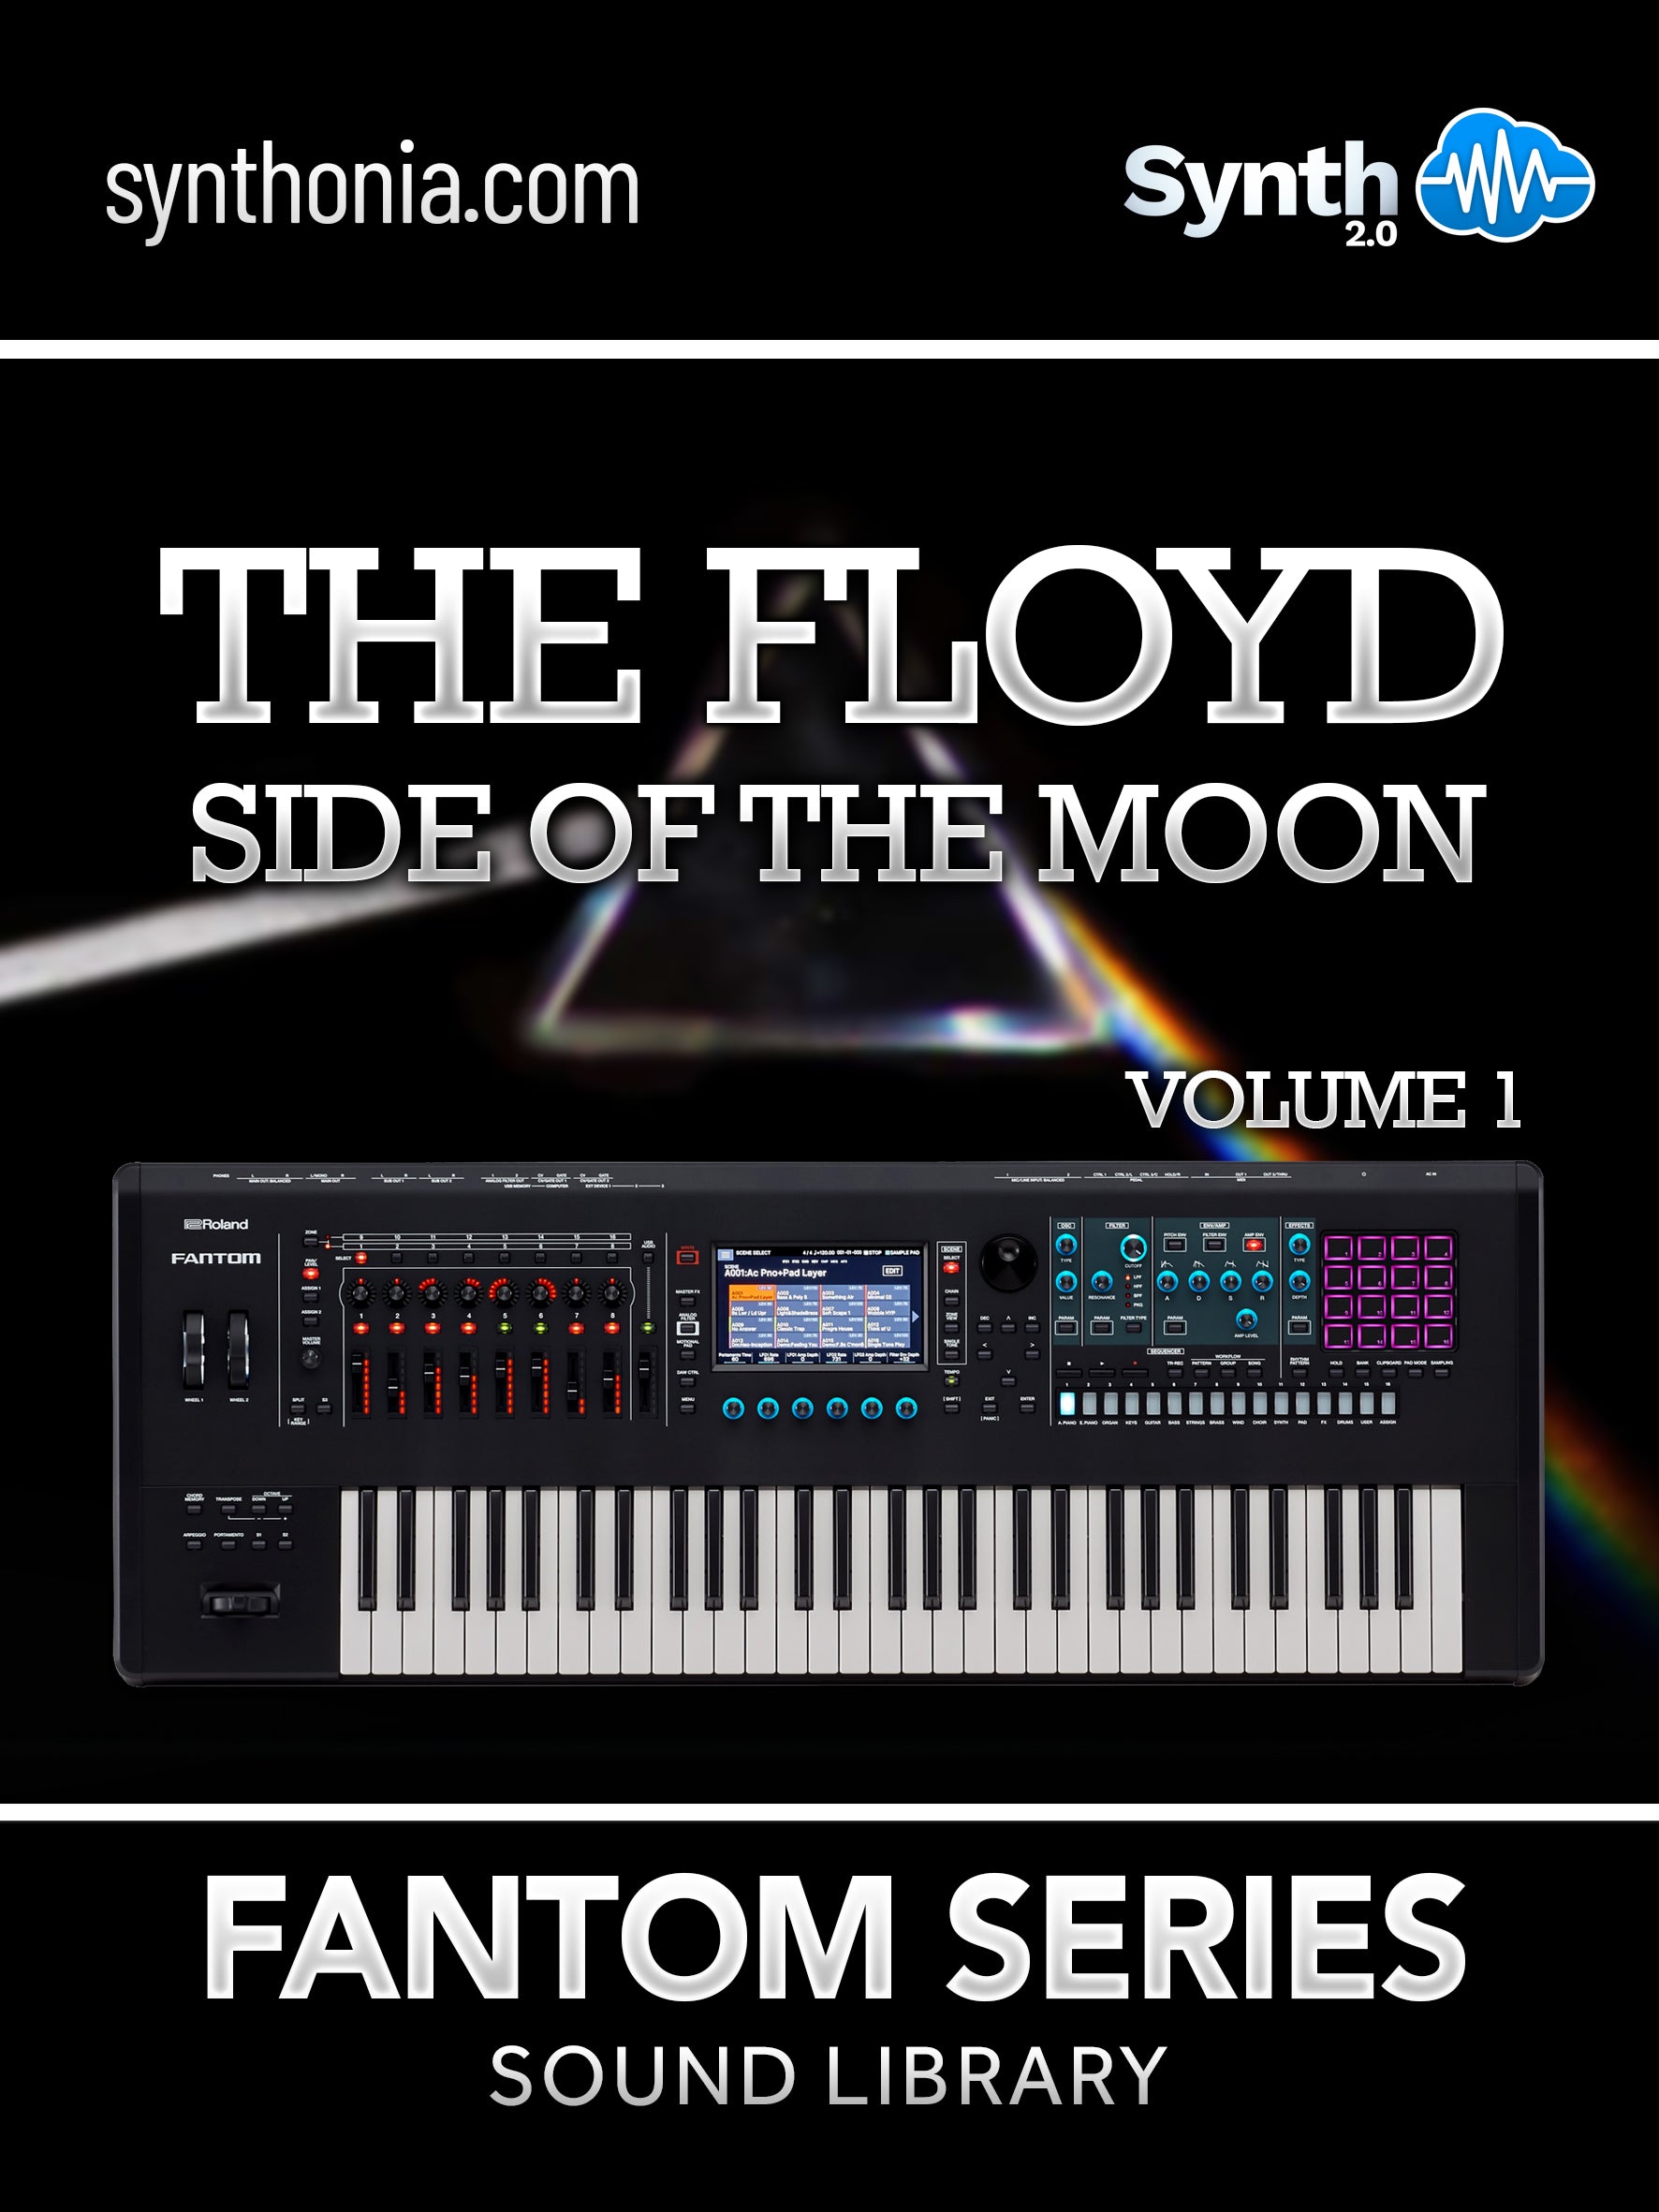 SCL485 - The Floyd Side Of The Moon Vol.1 + Vol.2 - Fantom